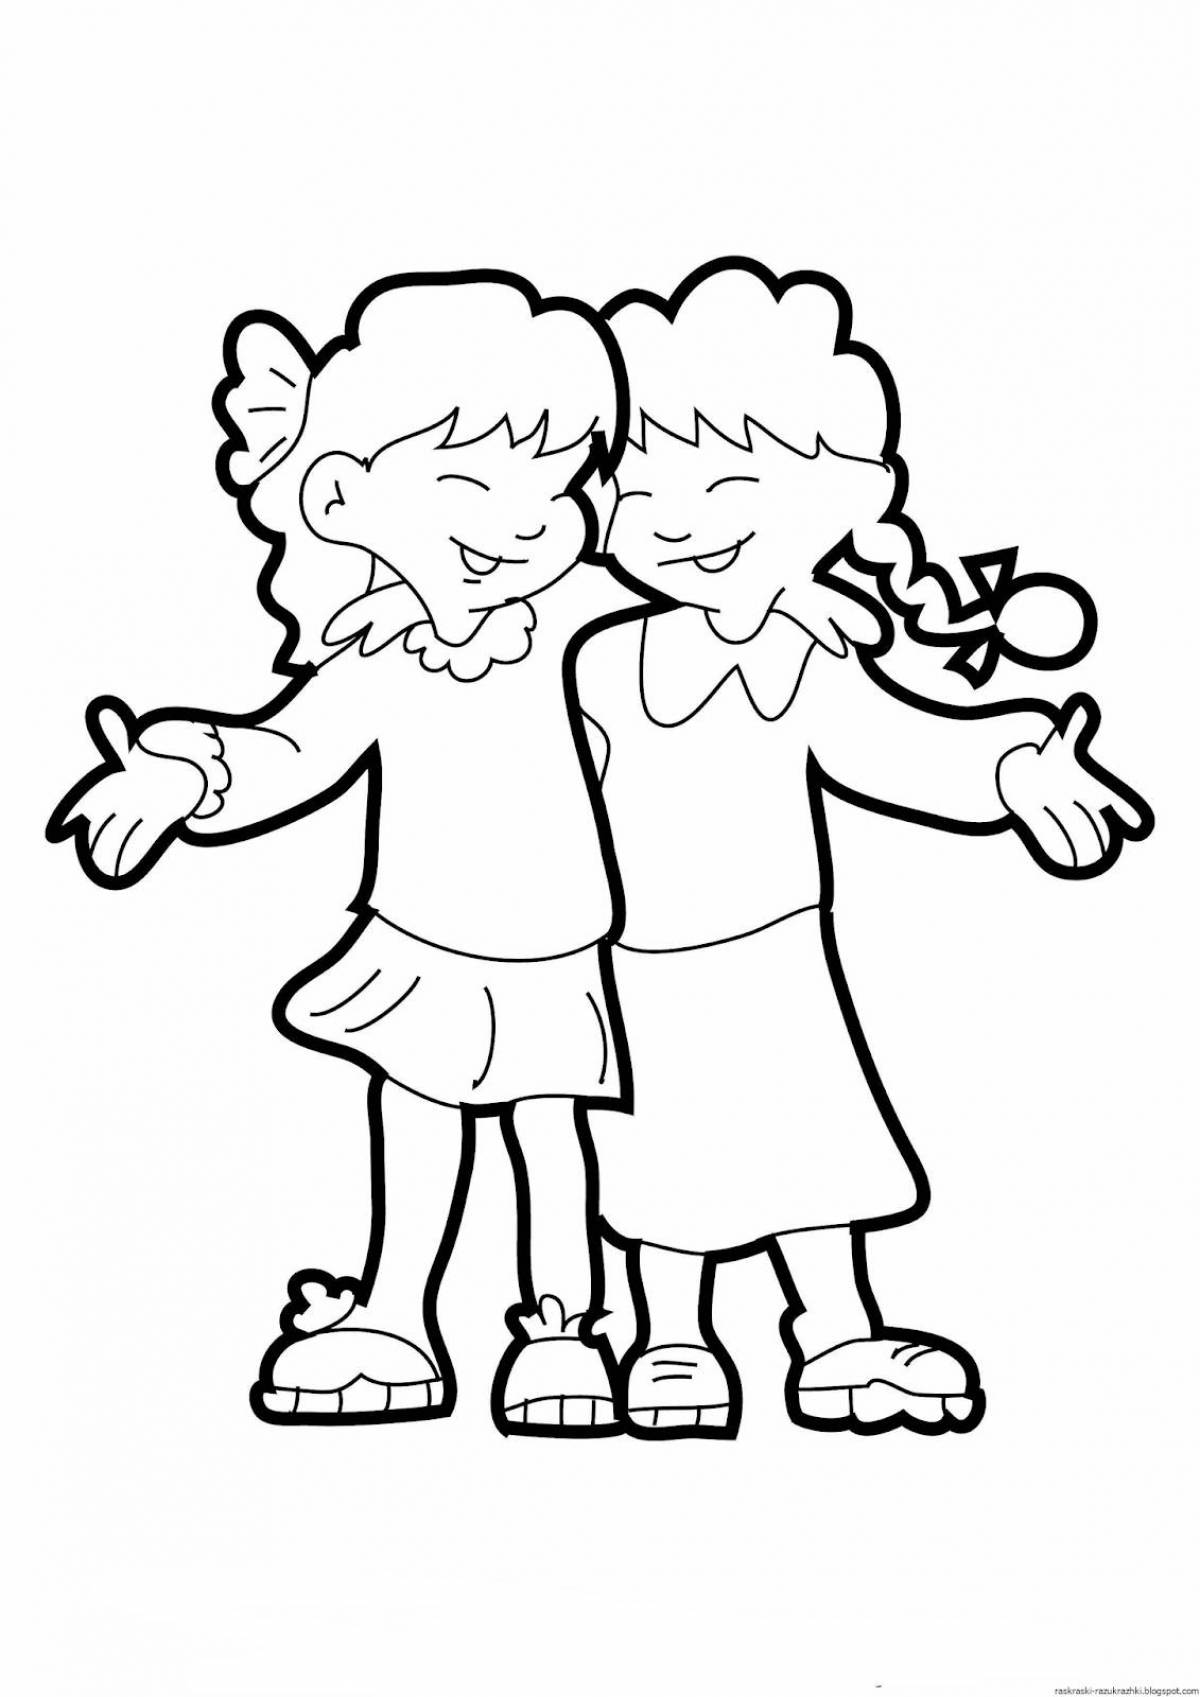 Coloring-imagination friends coloring page